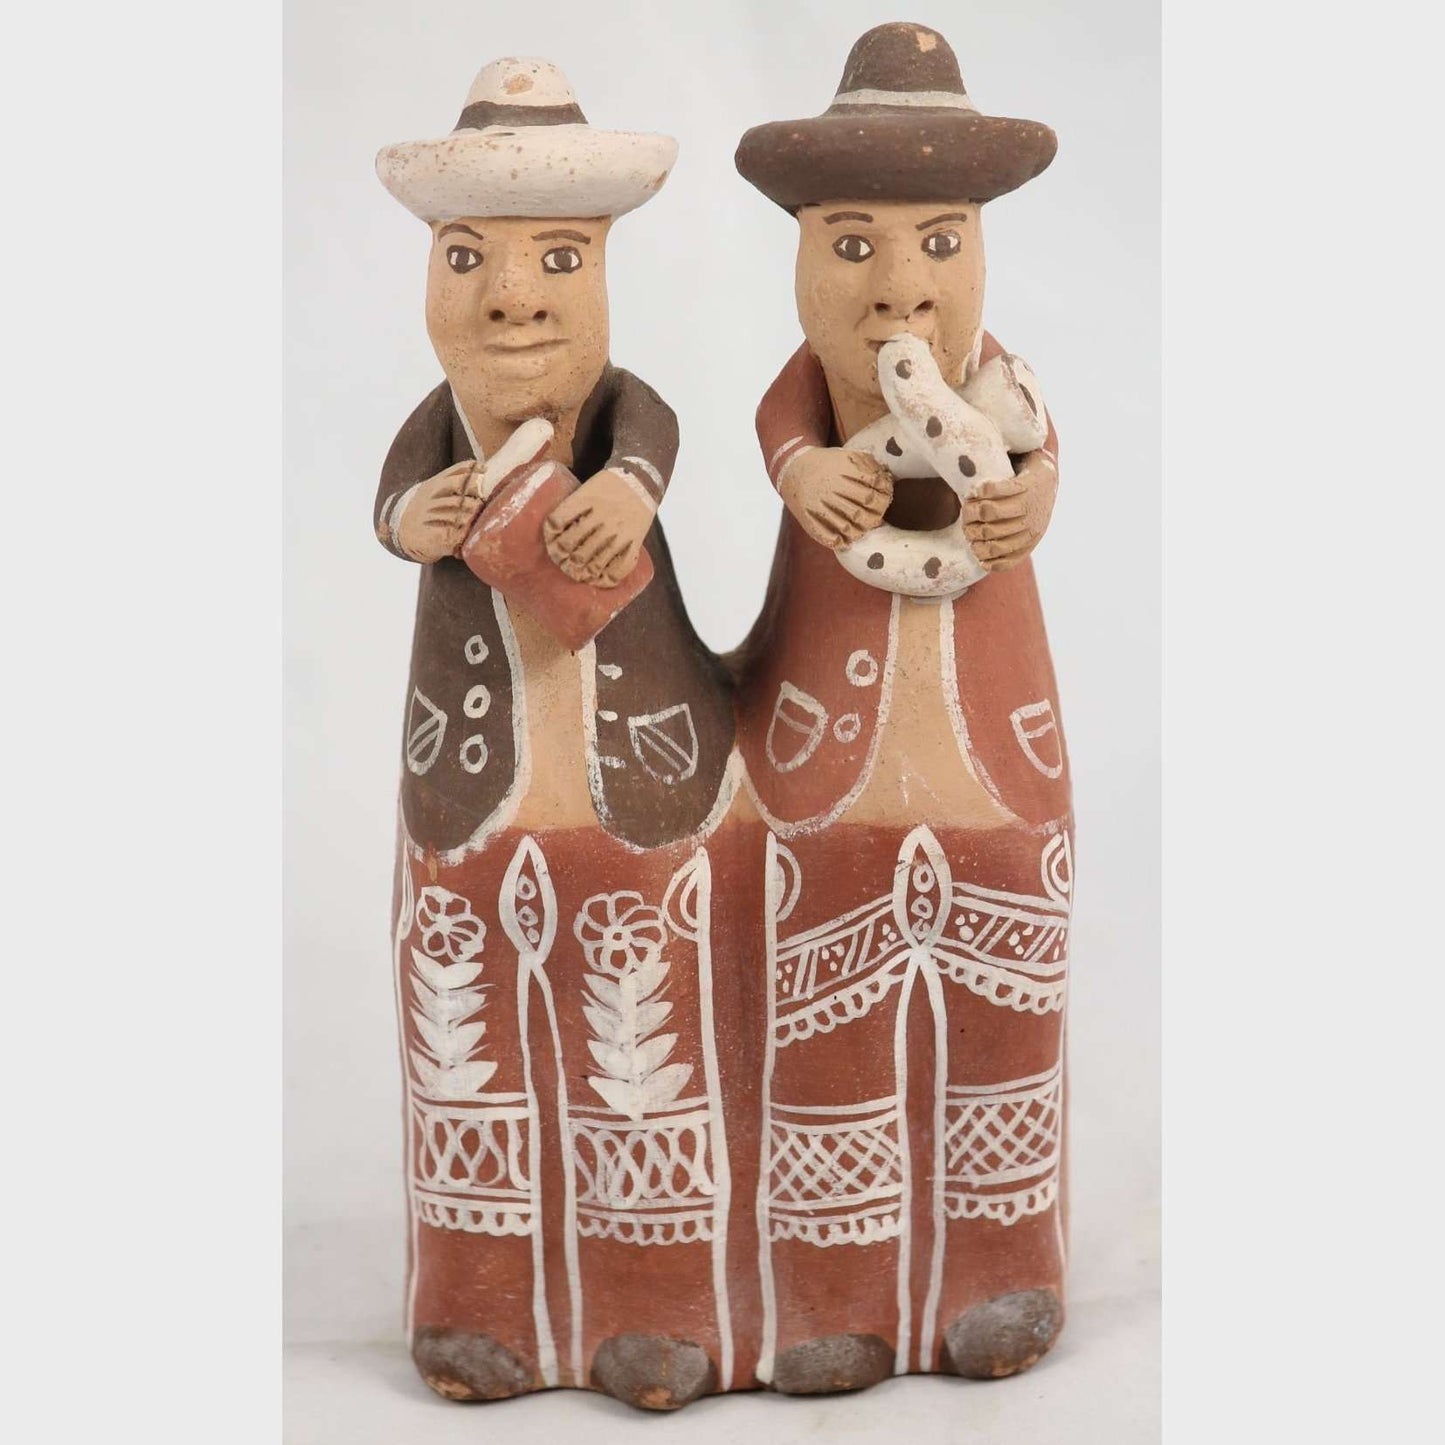 Pottery/Clay 2 Players Whistle/Flute Folk Art Peru South America